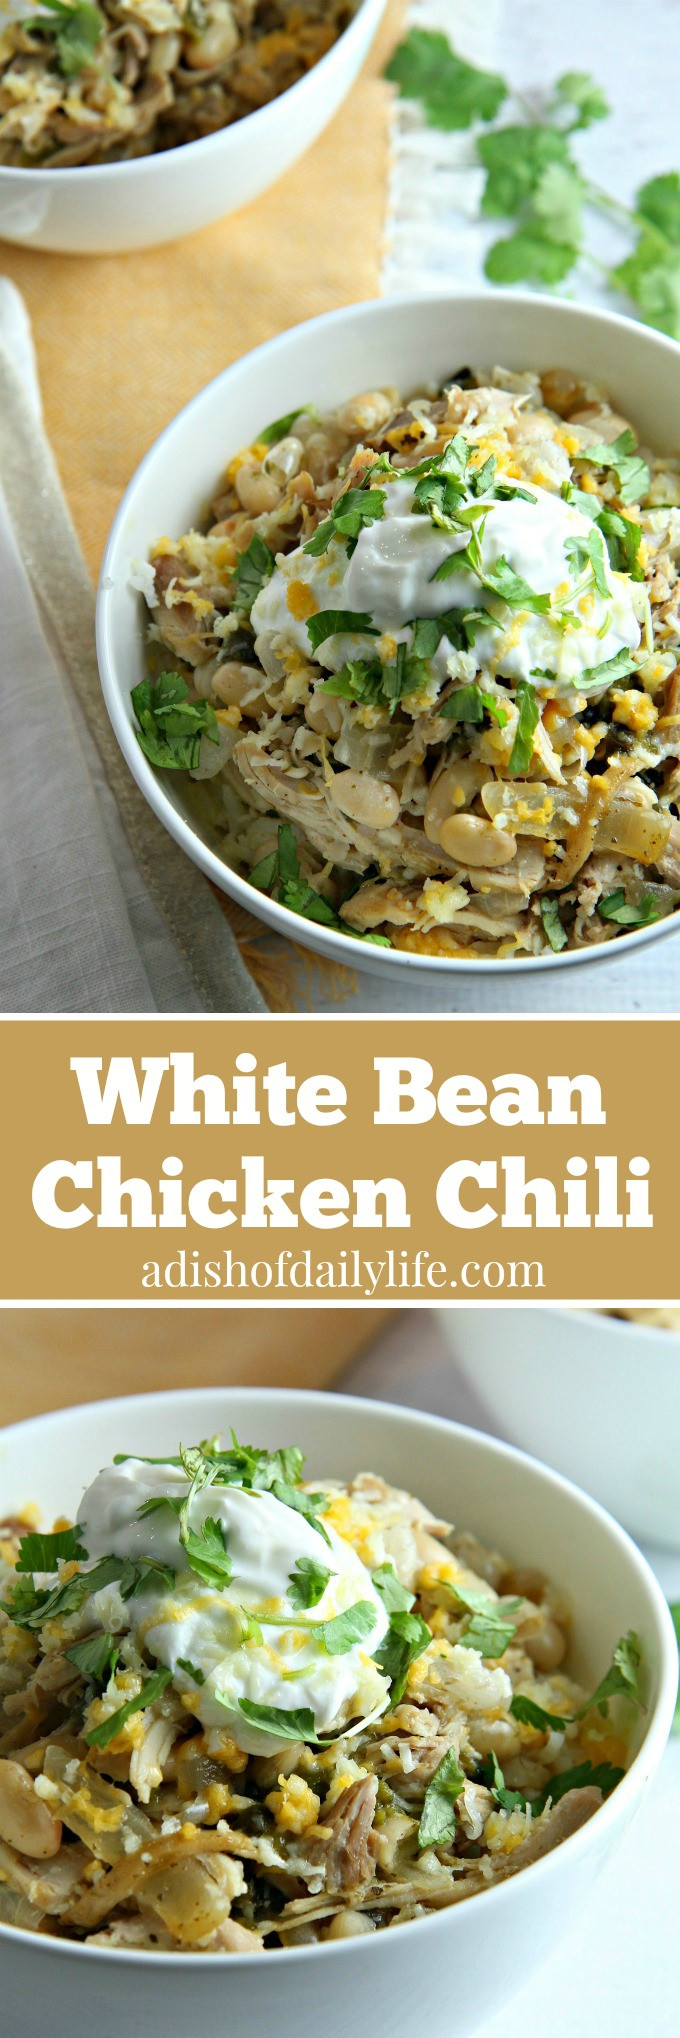 Chicken Chili With White Beans
 White Bean Chicken Chili recipe A Dish of Daily Life